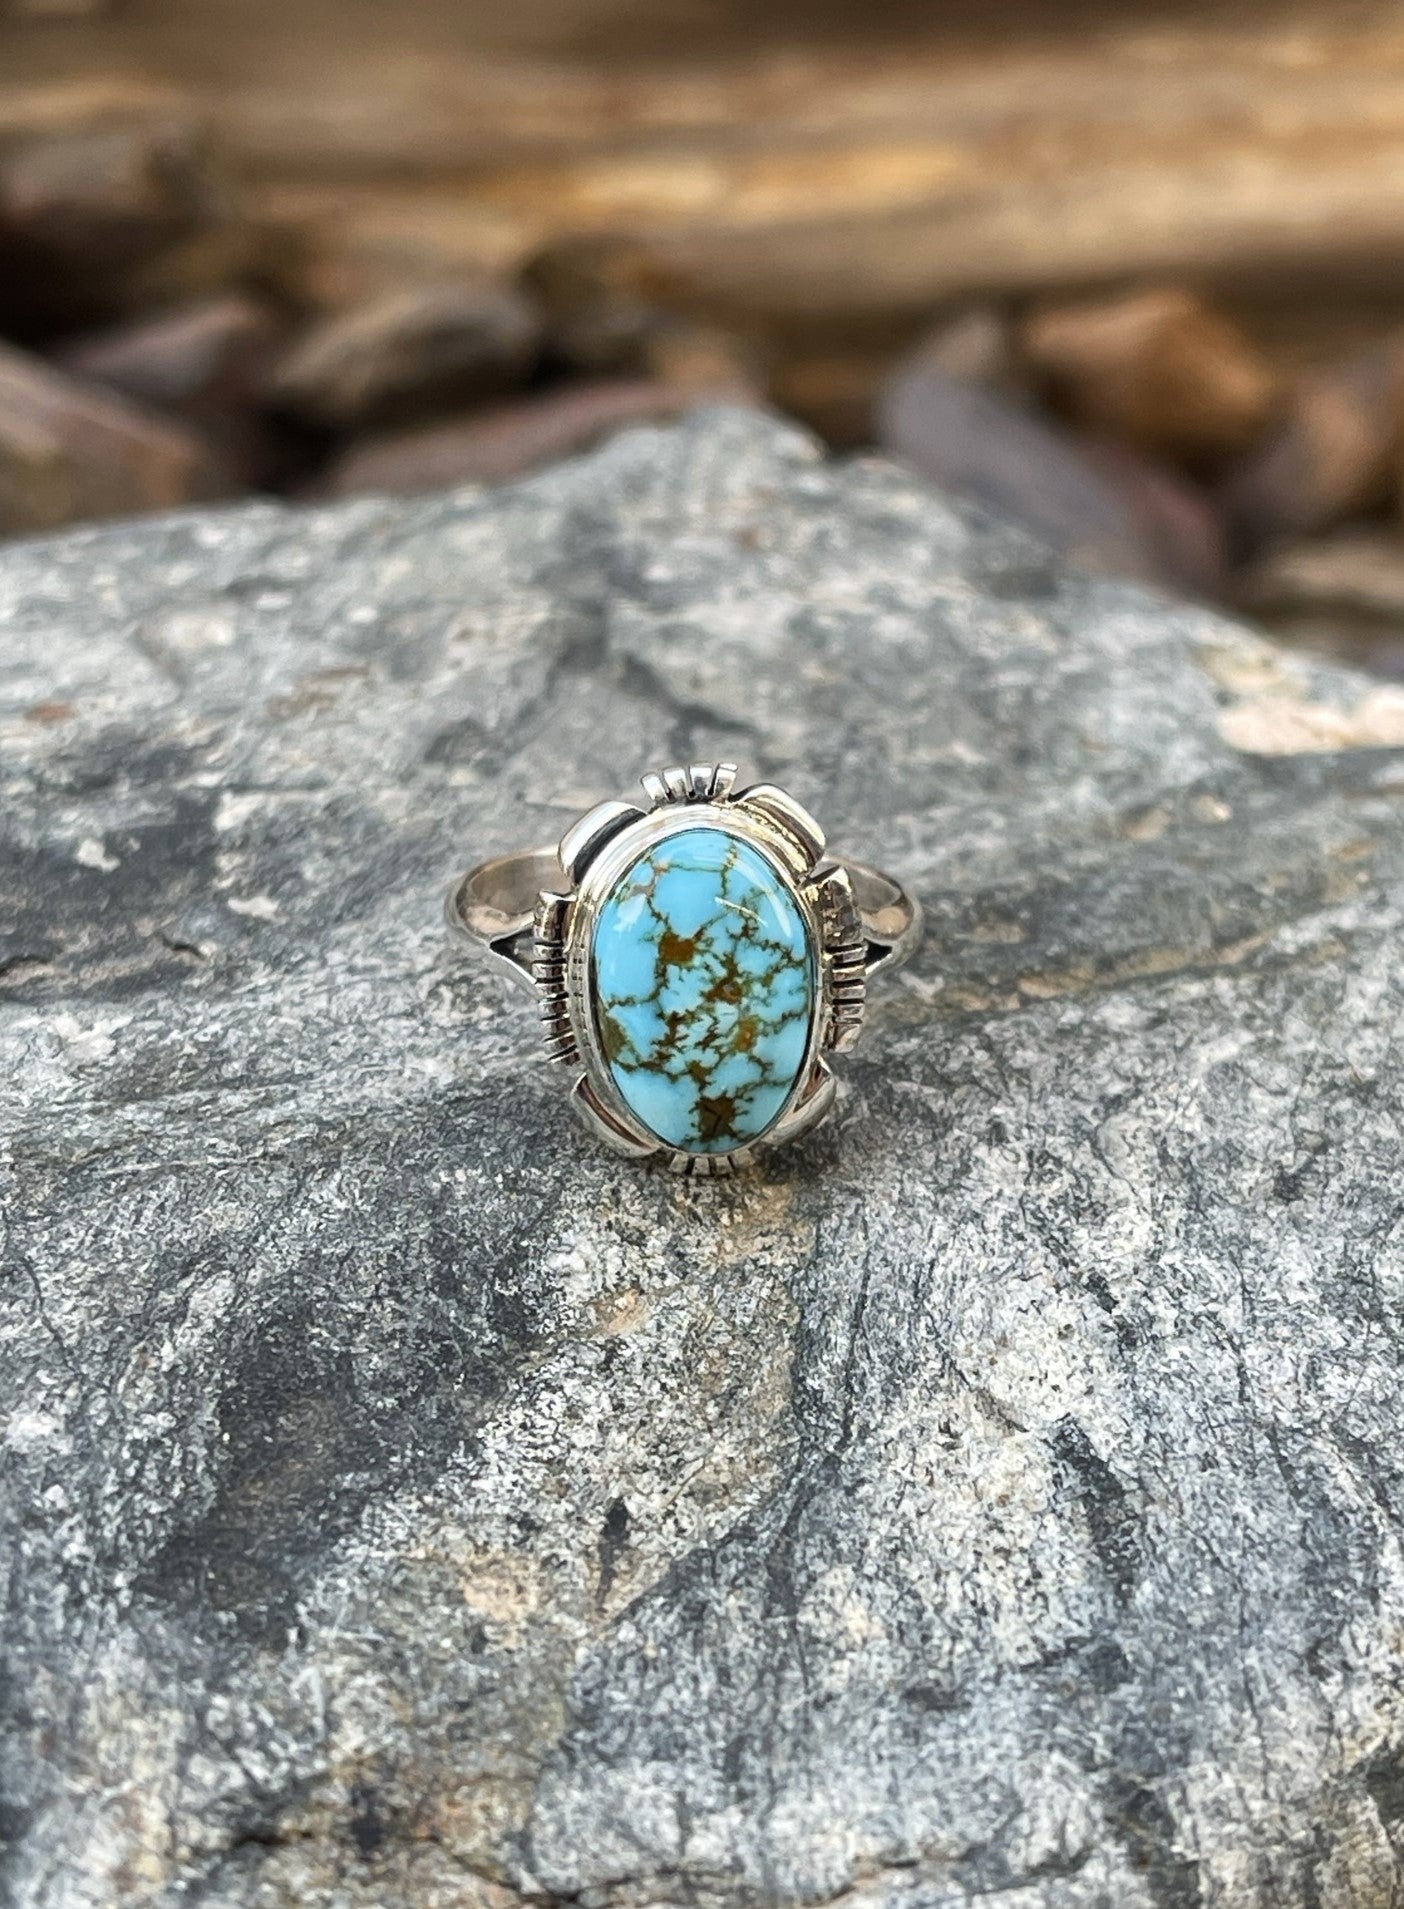 Dainty Handmade Solid Sterling Silver Turquoise Mountain Ring - Size 7 1/2